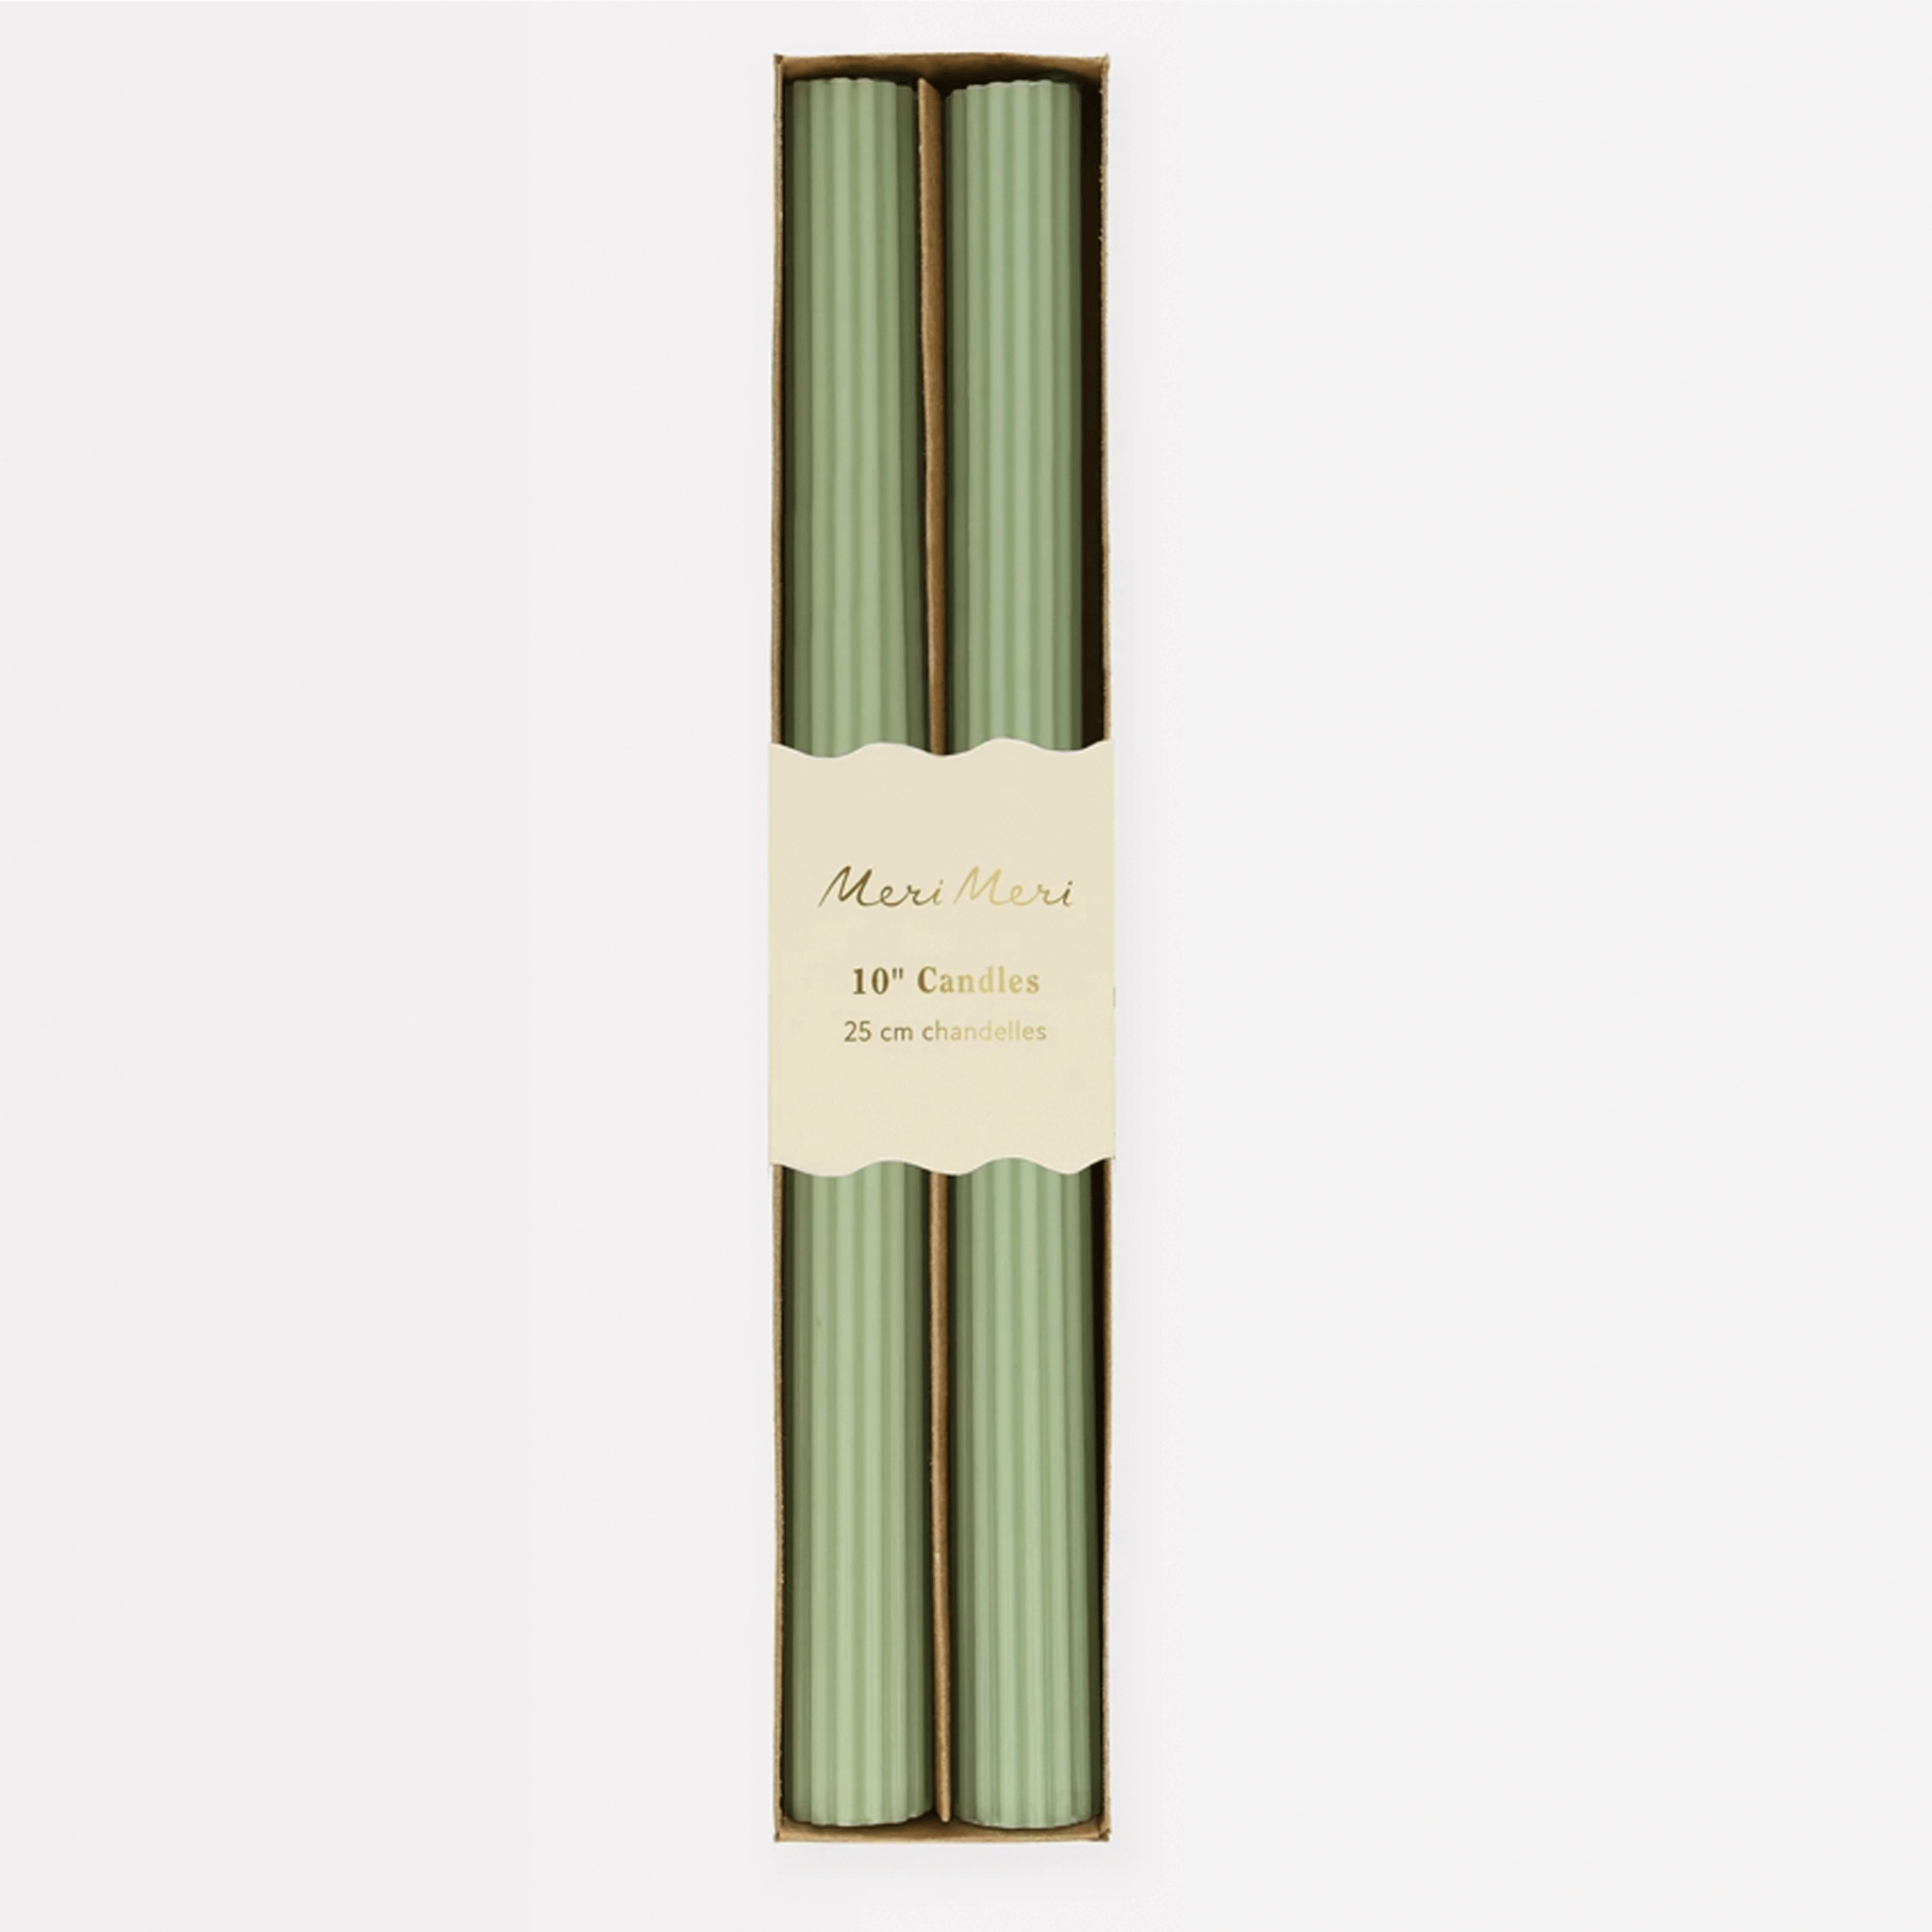 On a white background is a pair of green taper candles in their packaging with a ridged detail on each candle. 